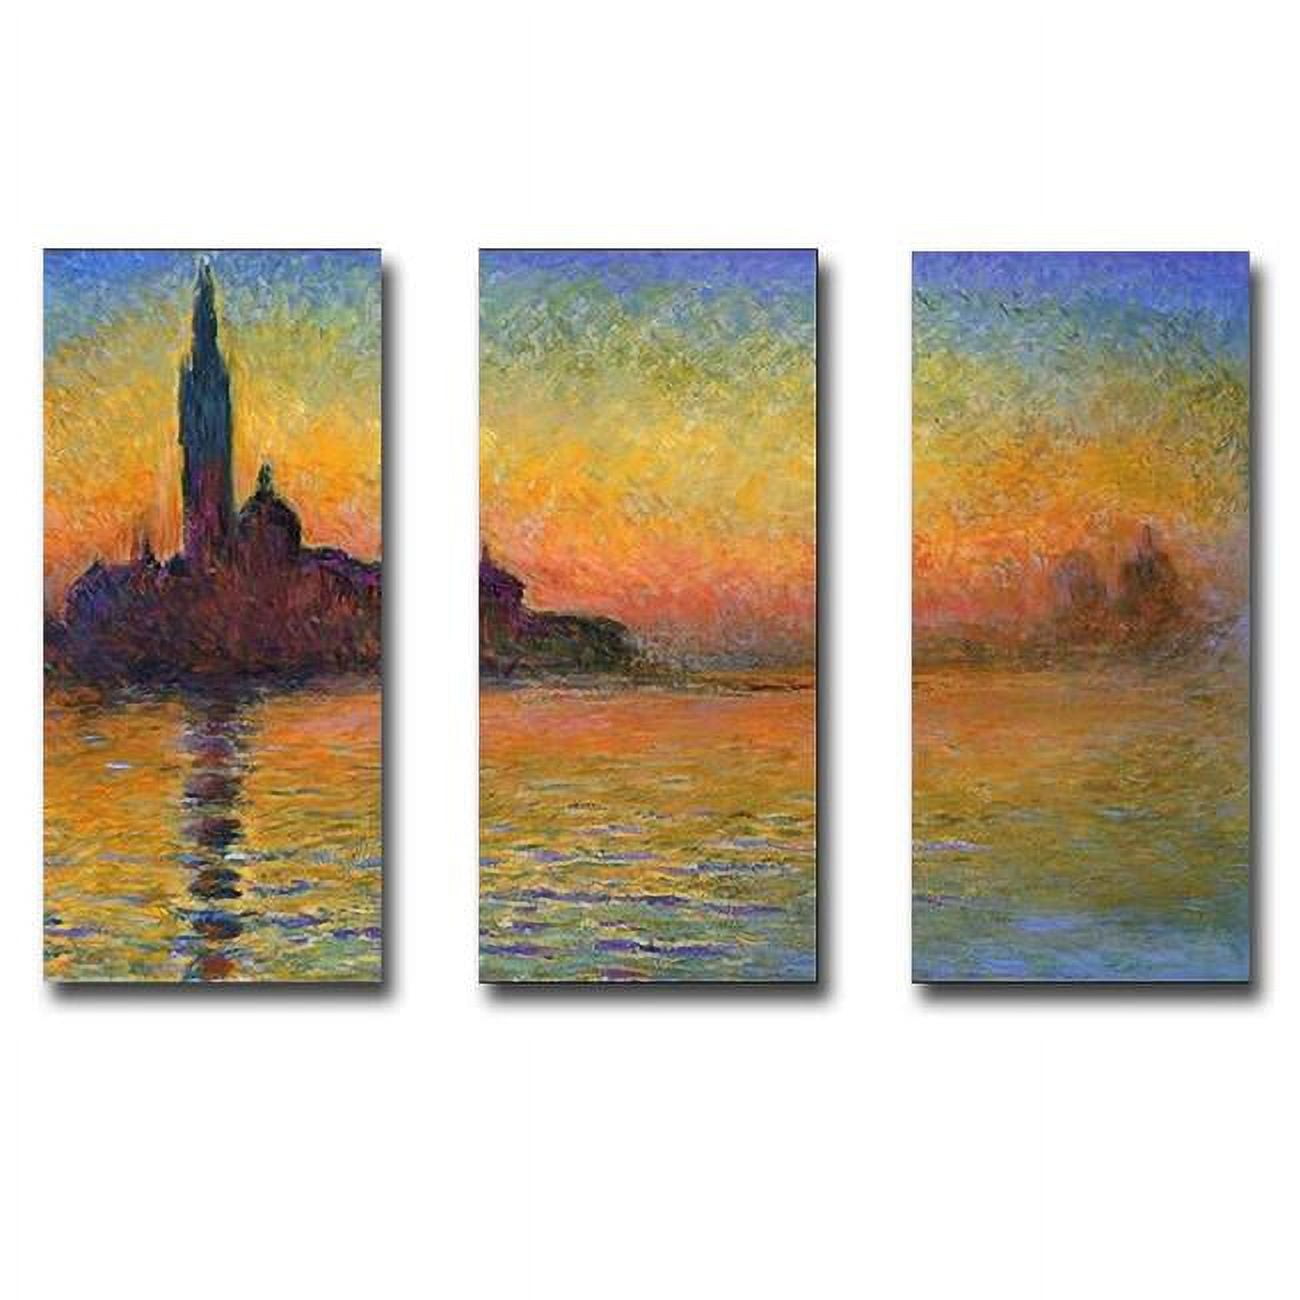 1224567bg Twilight Venice - San Giorgio Maggiore By Claude Monet Premium Gallery-wrapped Canvas Giclee Art Set - Ready To Hang, 12 X 24 X 1.5 In.